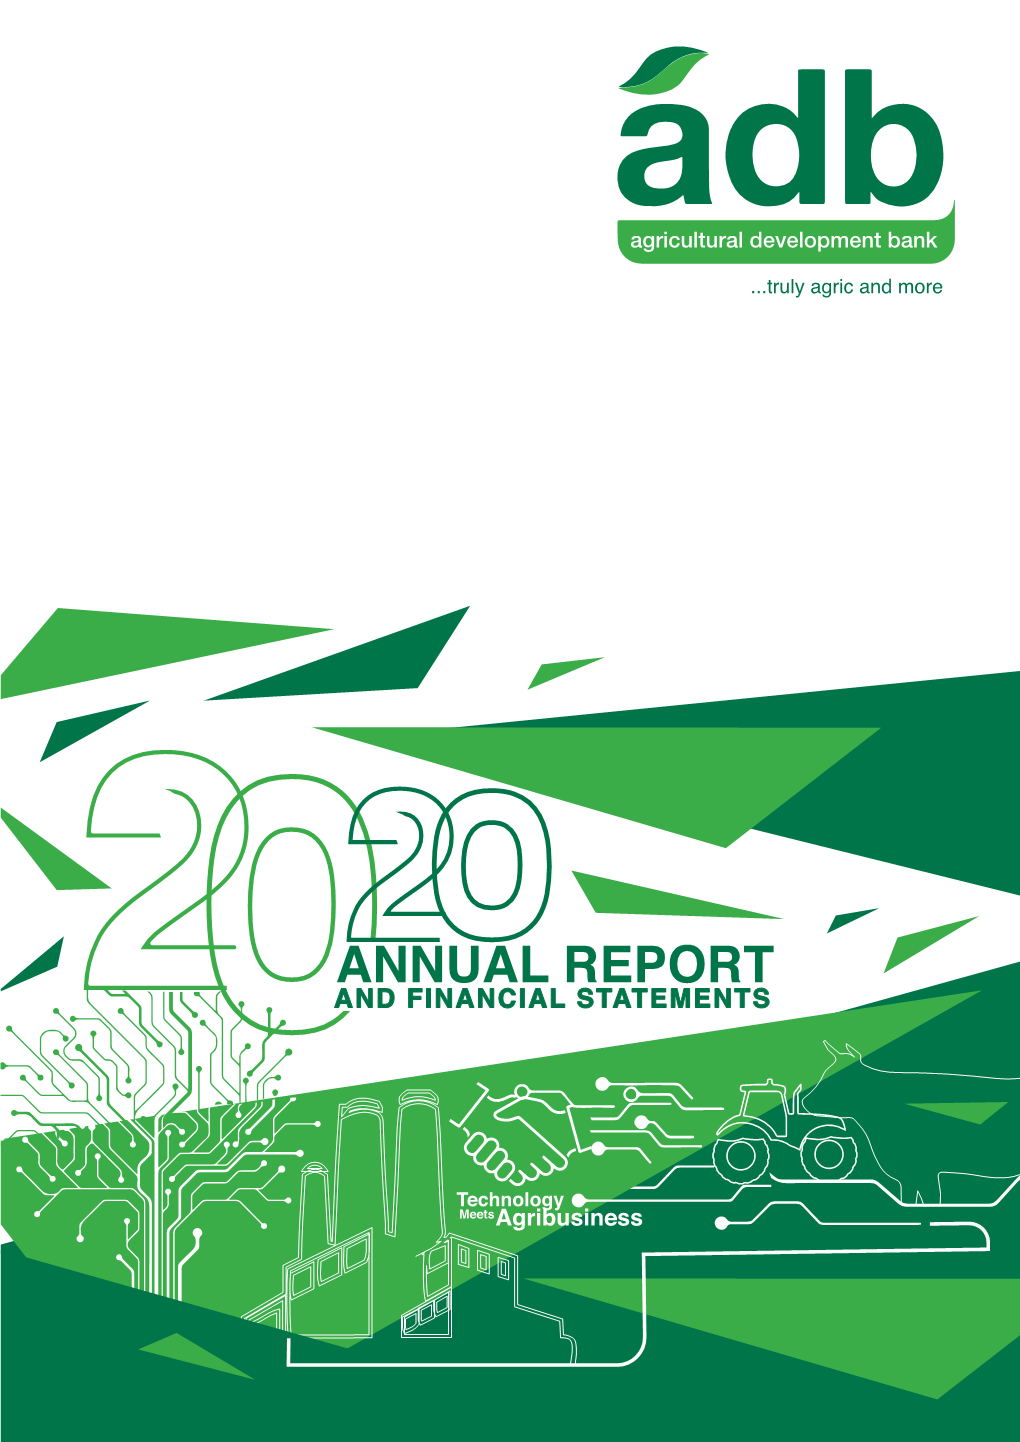 2020 Annual Report & Financial Statements VISION, MISSION & CORE VALUES